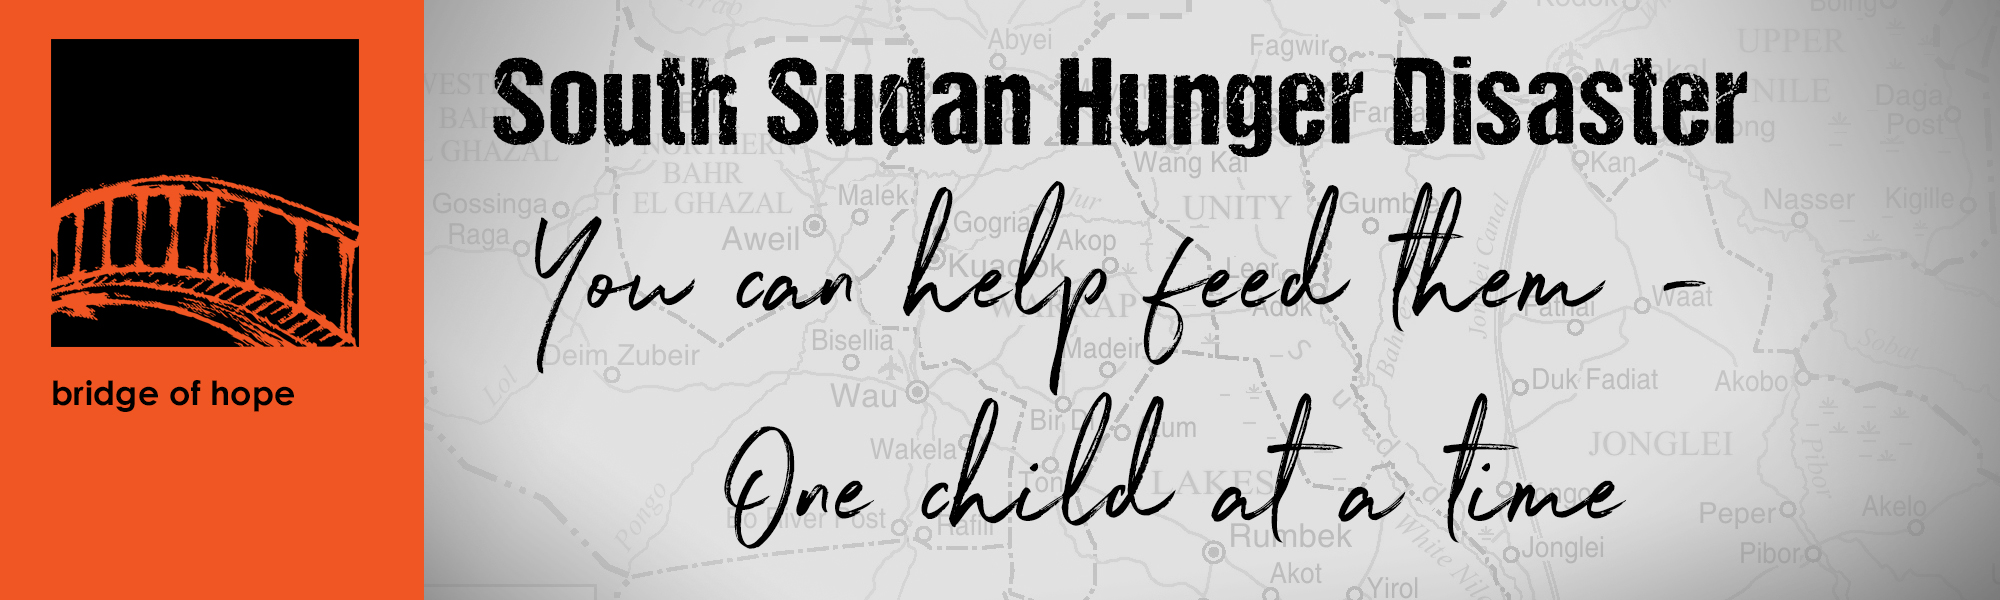 Families, children desperate for food! Matching challenge doubles your impact to help feed them